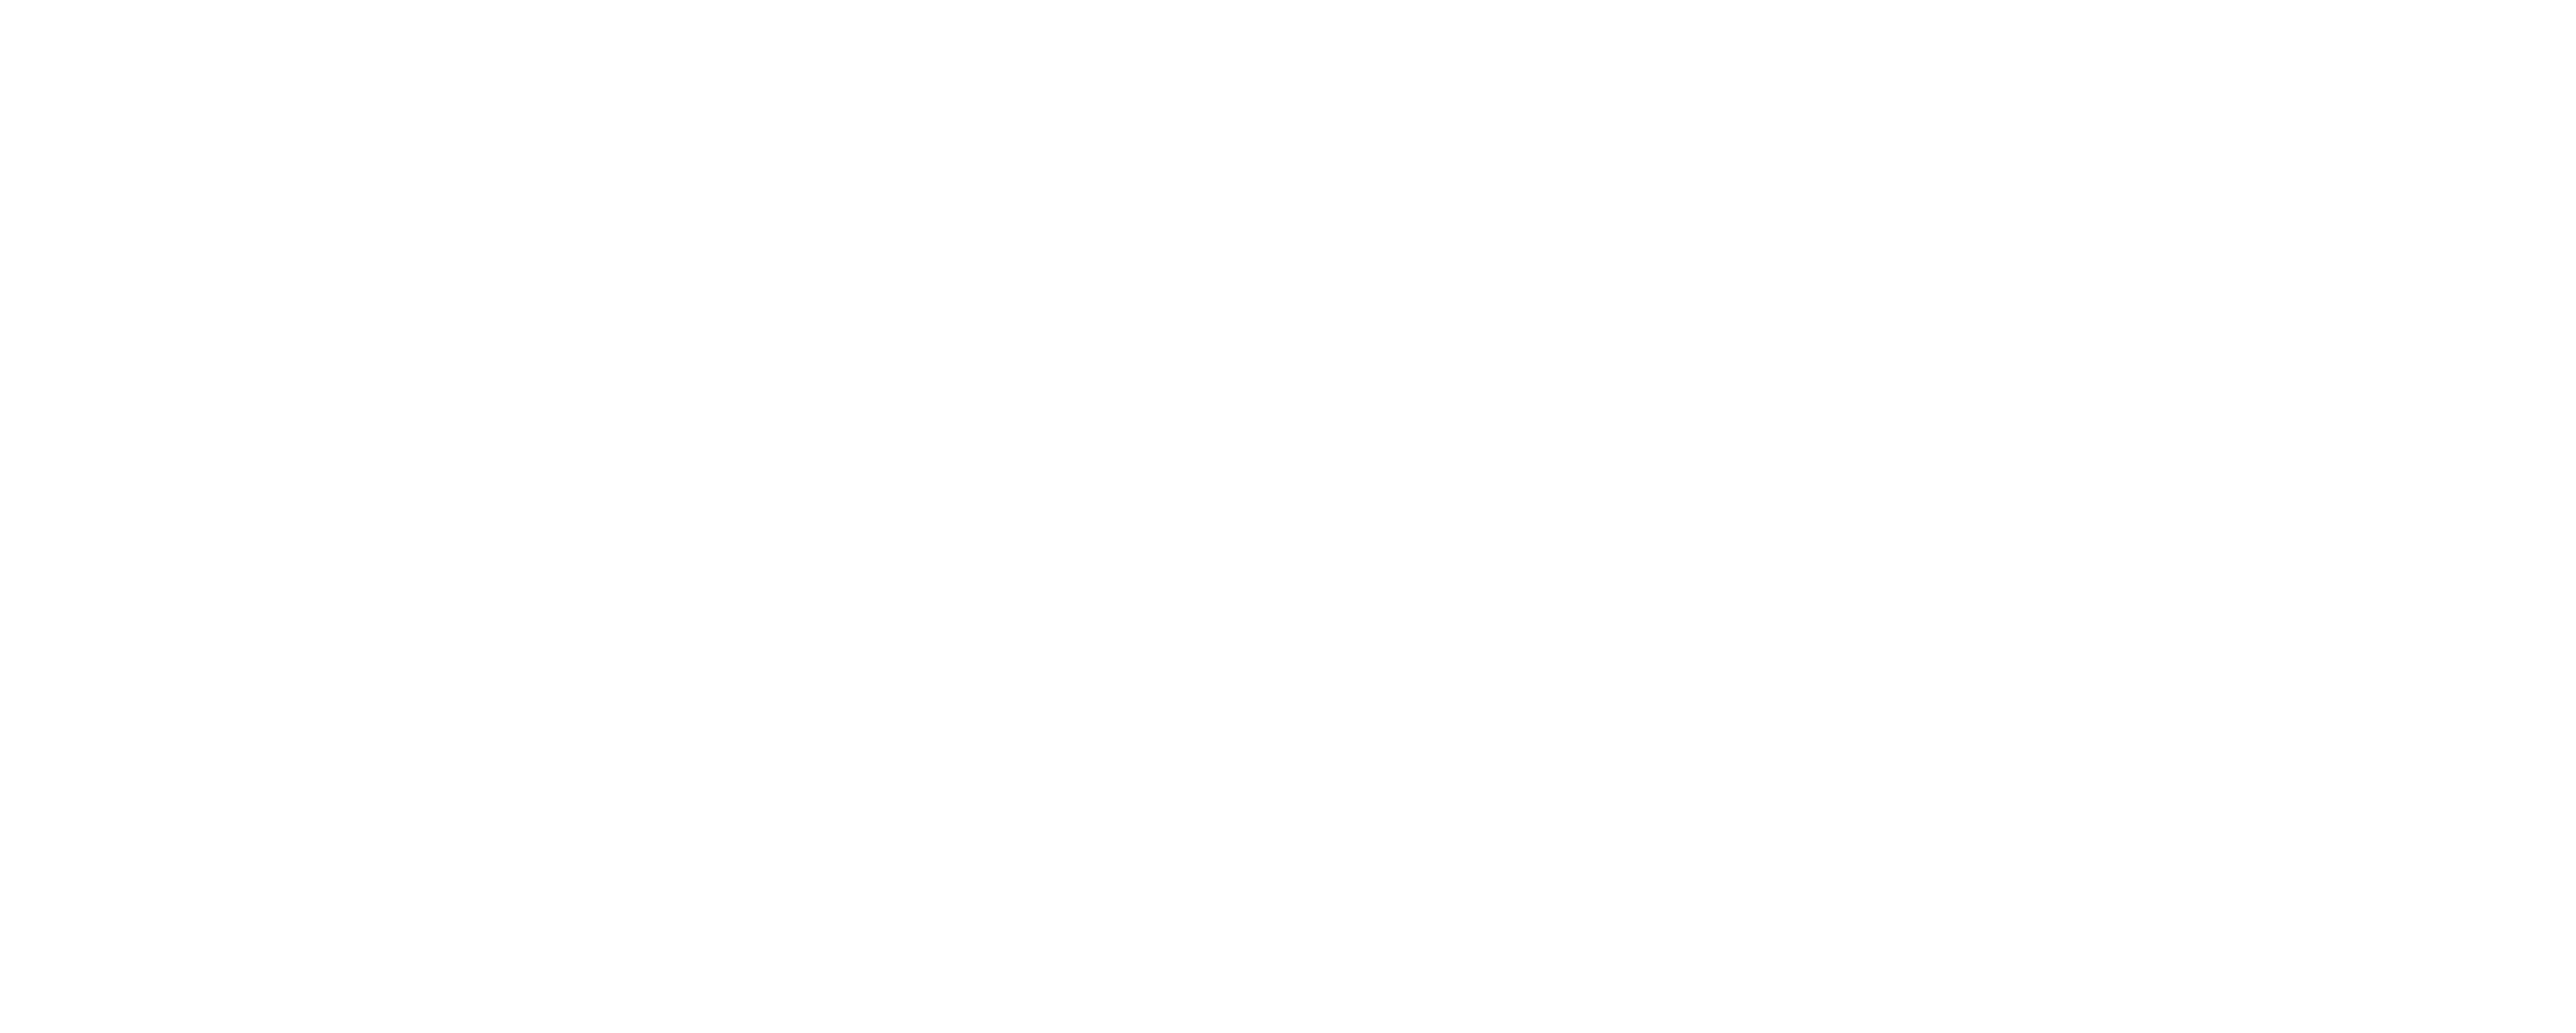 WorthPoint